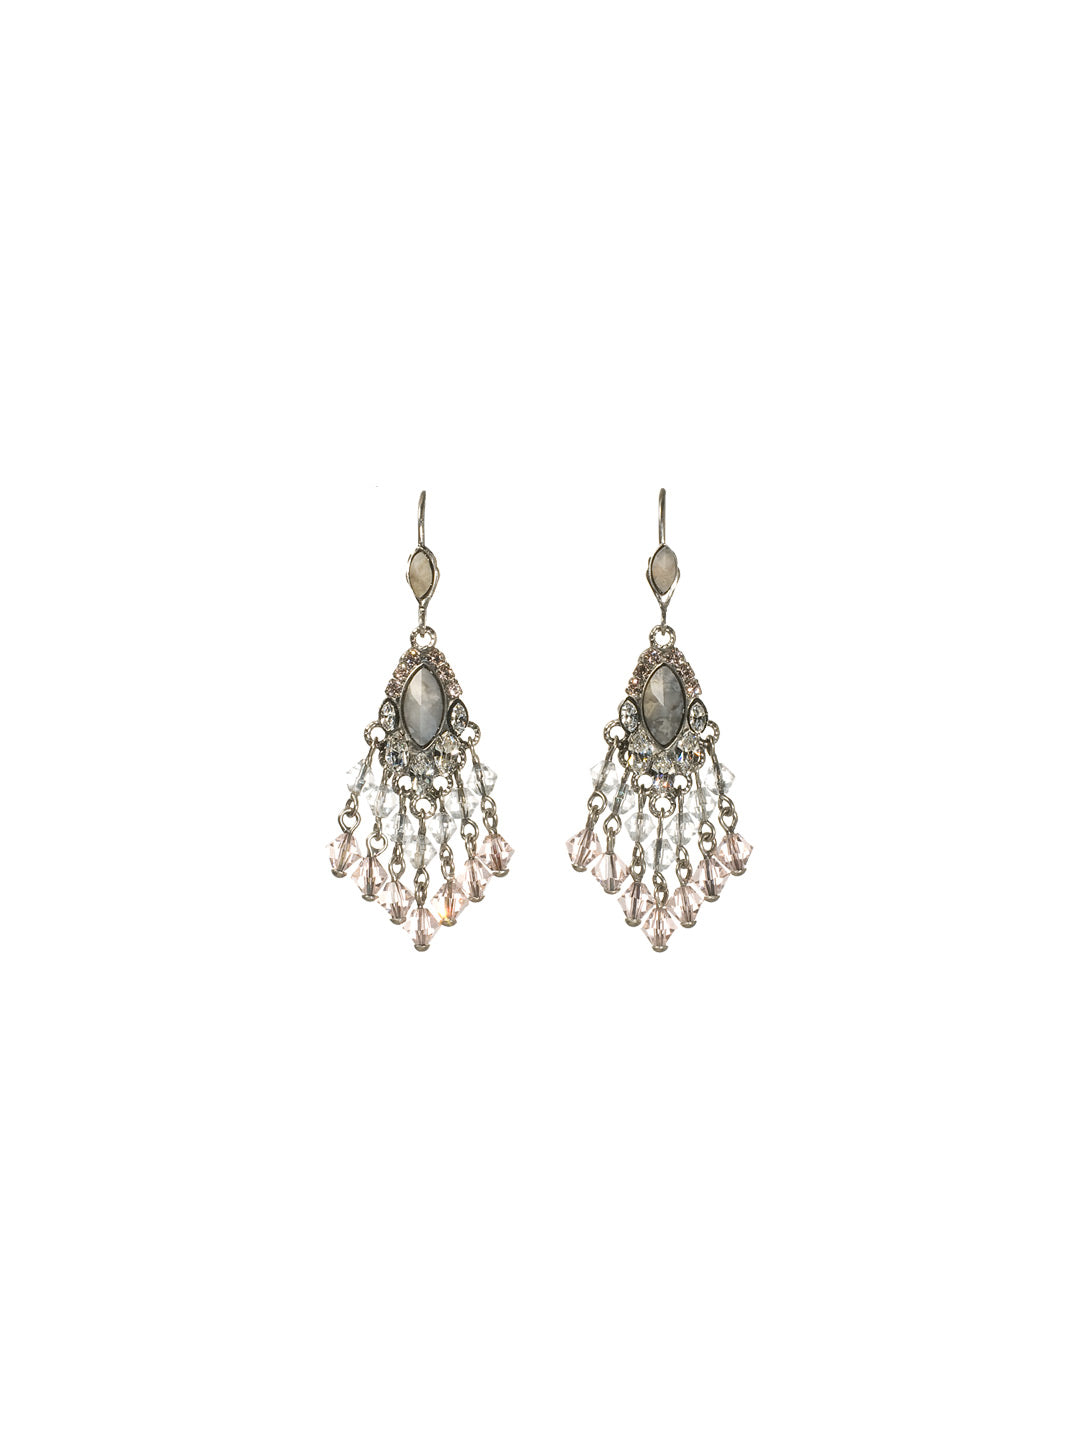 Chandelier Beaded Dangle Earrings - EBF8ASSNB - <p>The Chandelier Beaded Dangle Earrings feature intricate beading and crystals on a lever-back French wire. From Sorrelli's Snow Bunny collection in our Antique Silver-tone finish.</p>